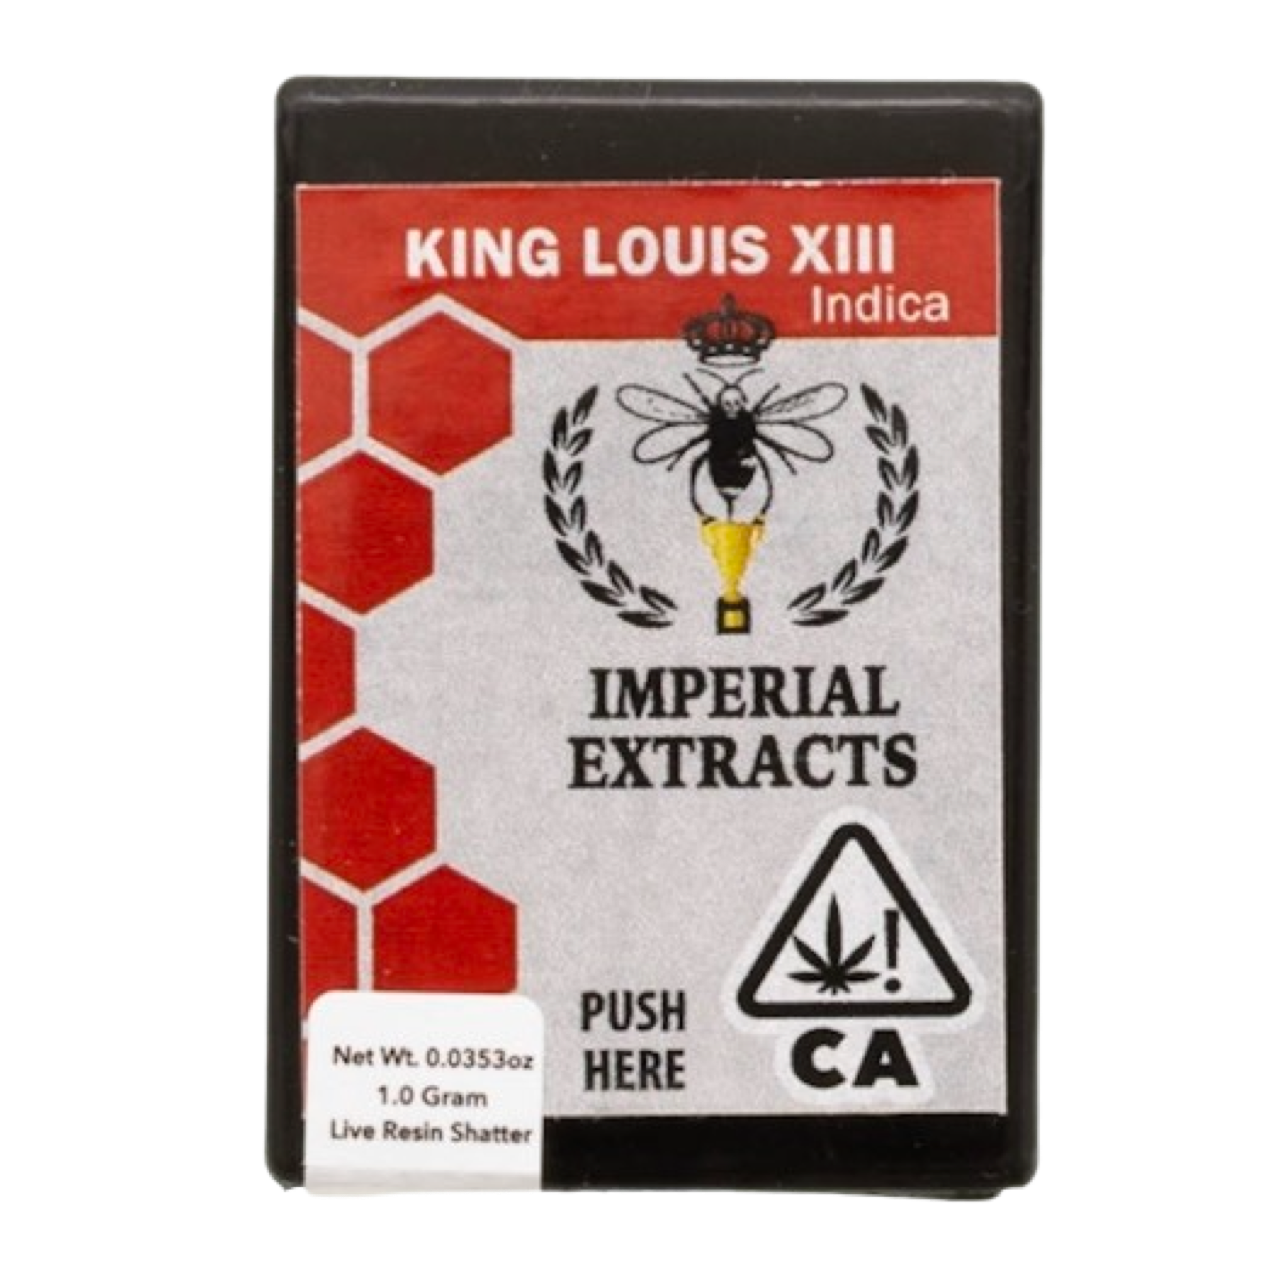 1 Gram Live Resin Shatter by Imperial Extracts | King Louis XXI | Indica